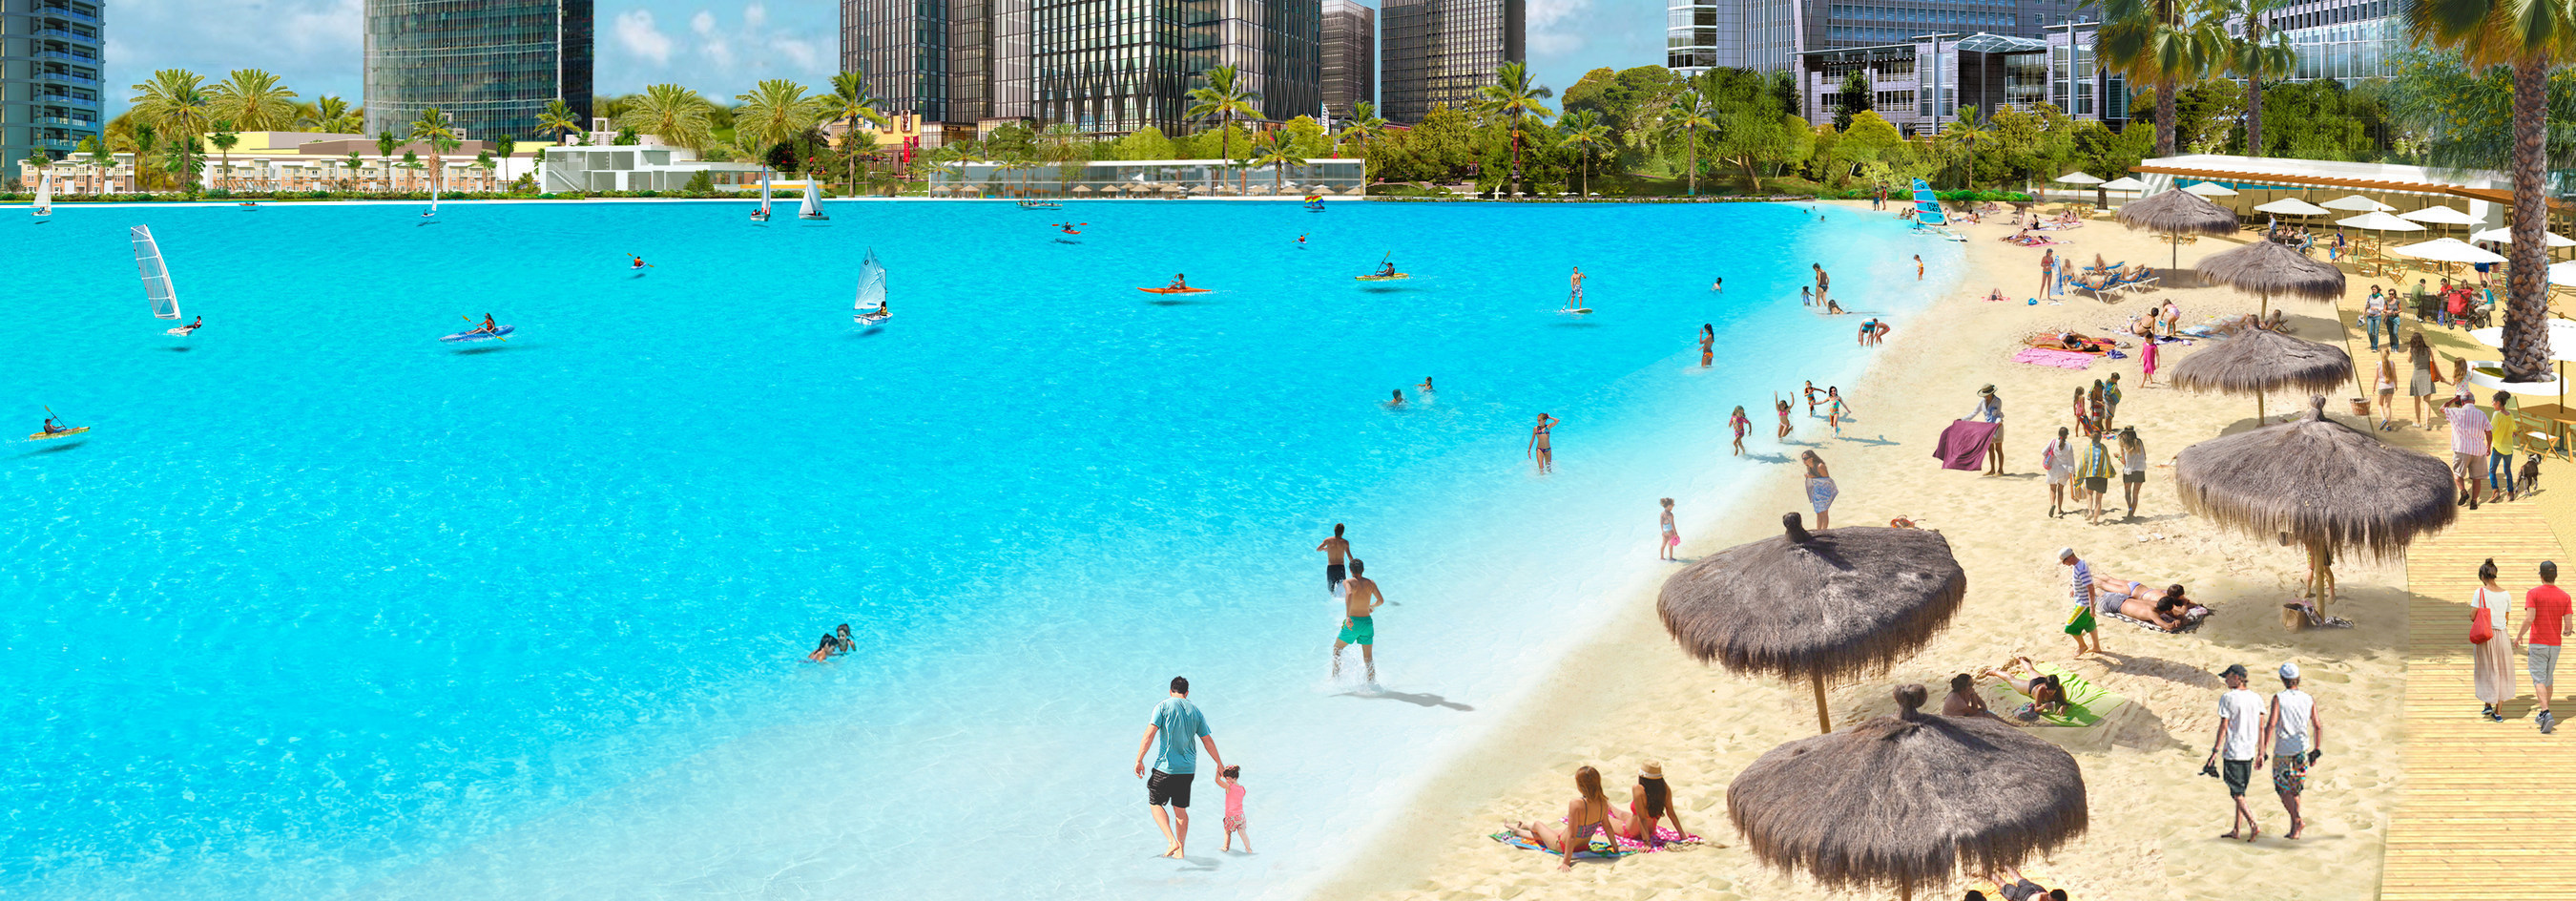 "Crystal Lagoons Concept - Idyllic Beach Life & Water Sports" - Please note rendering is not specific to the  Wynn lagoon but rather a general Crystal Lagoons concept featuring idyllic beach life and water sports. Courtesy: Crystal Lagoons